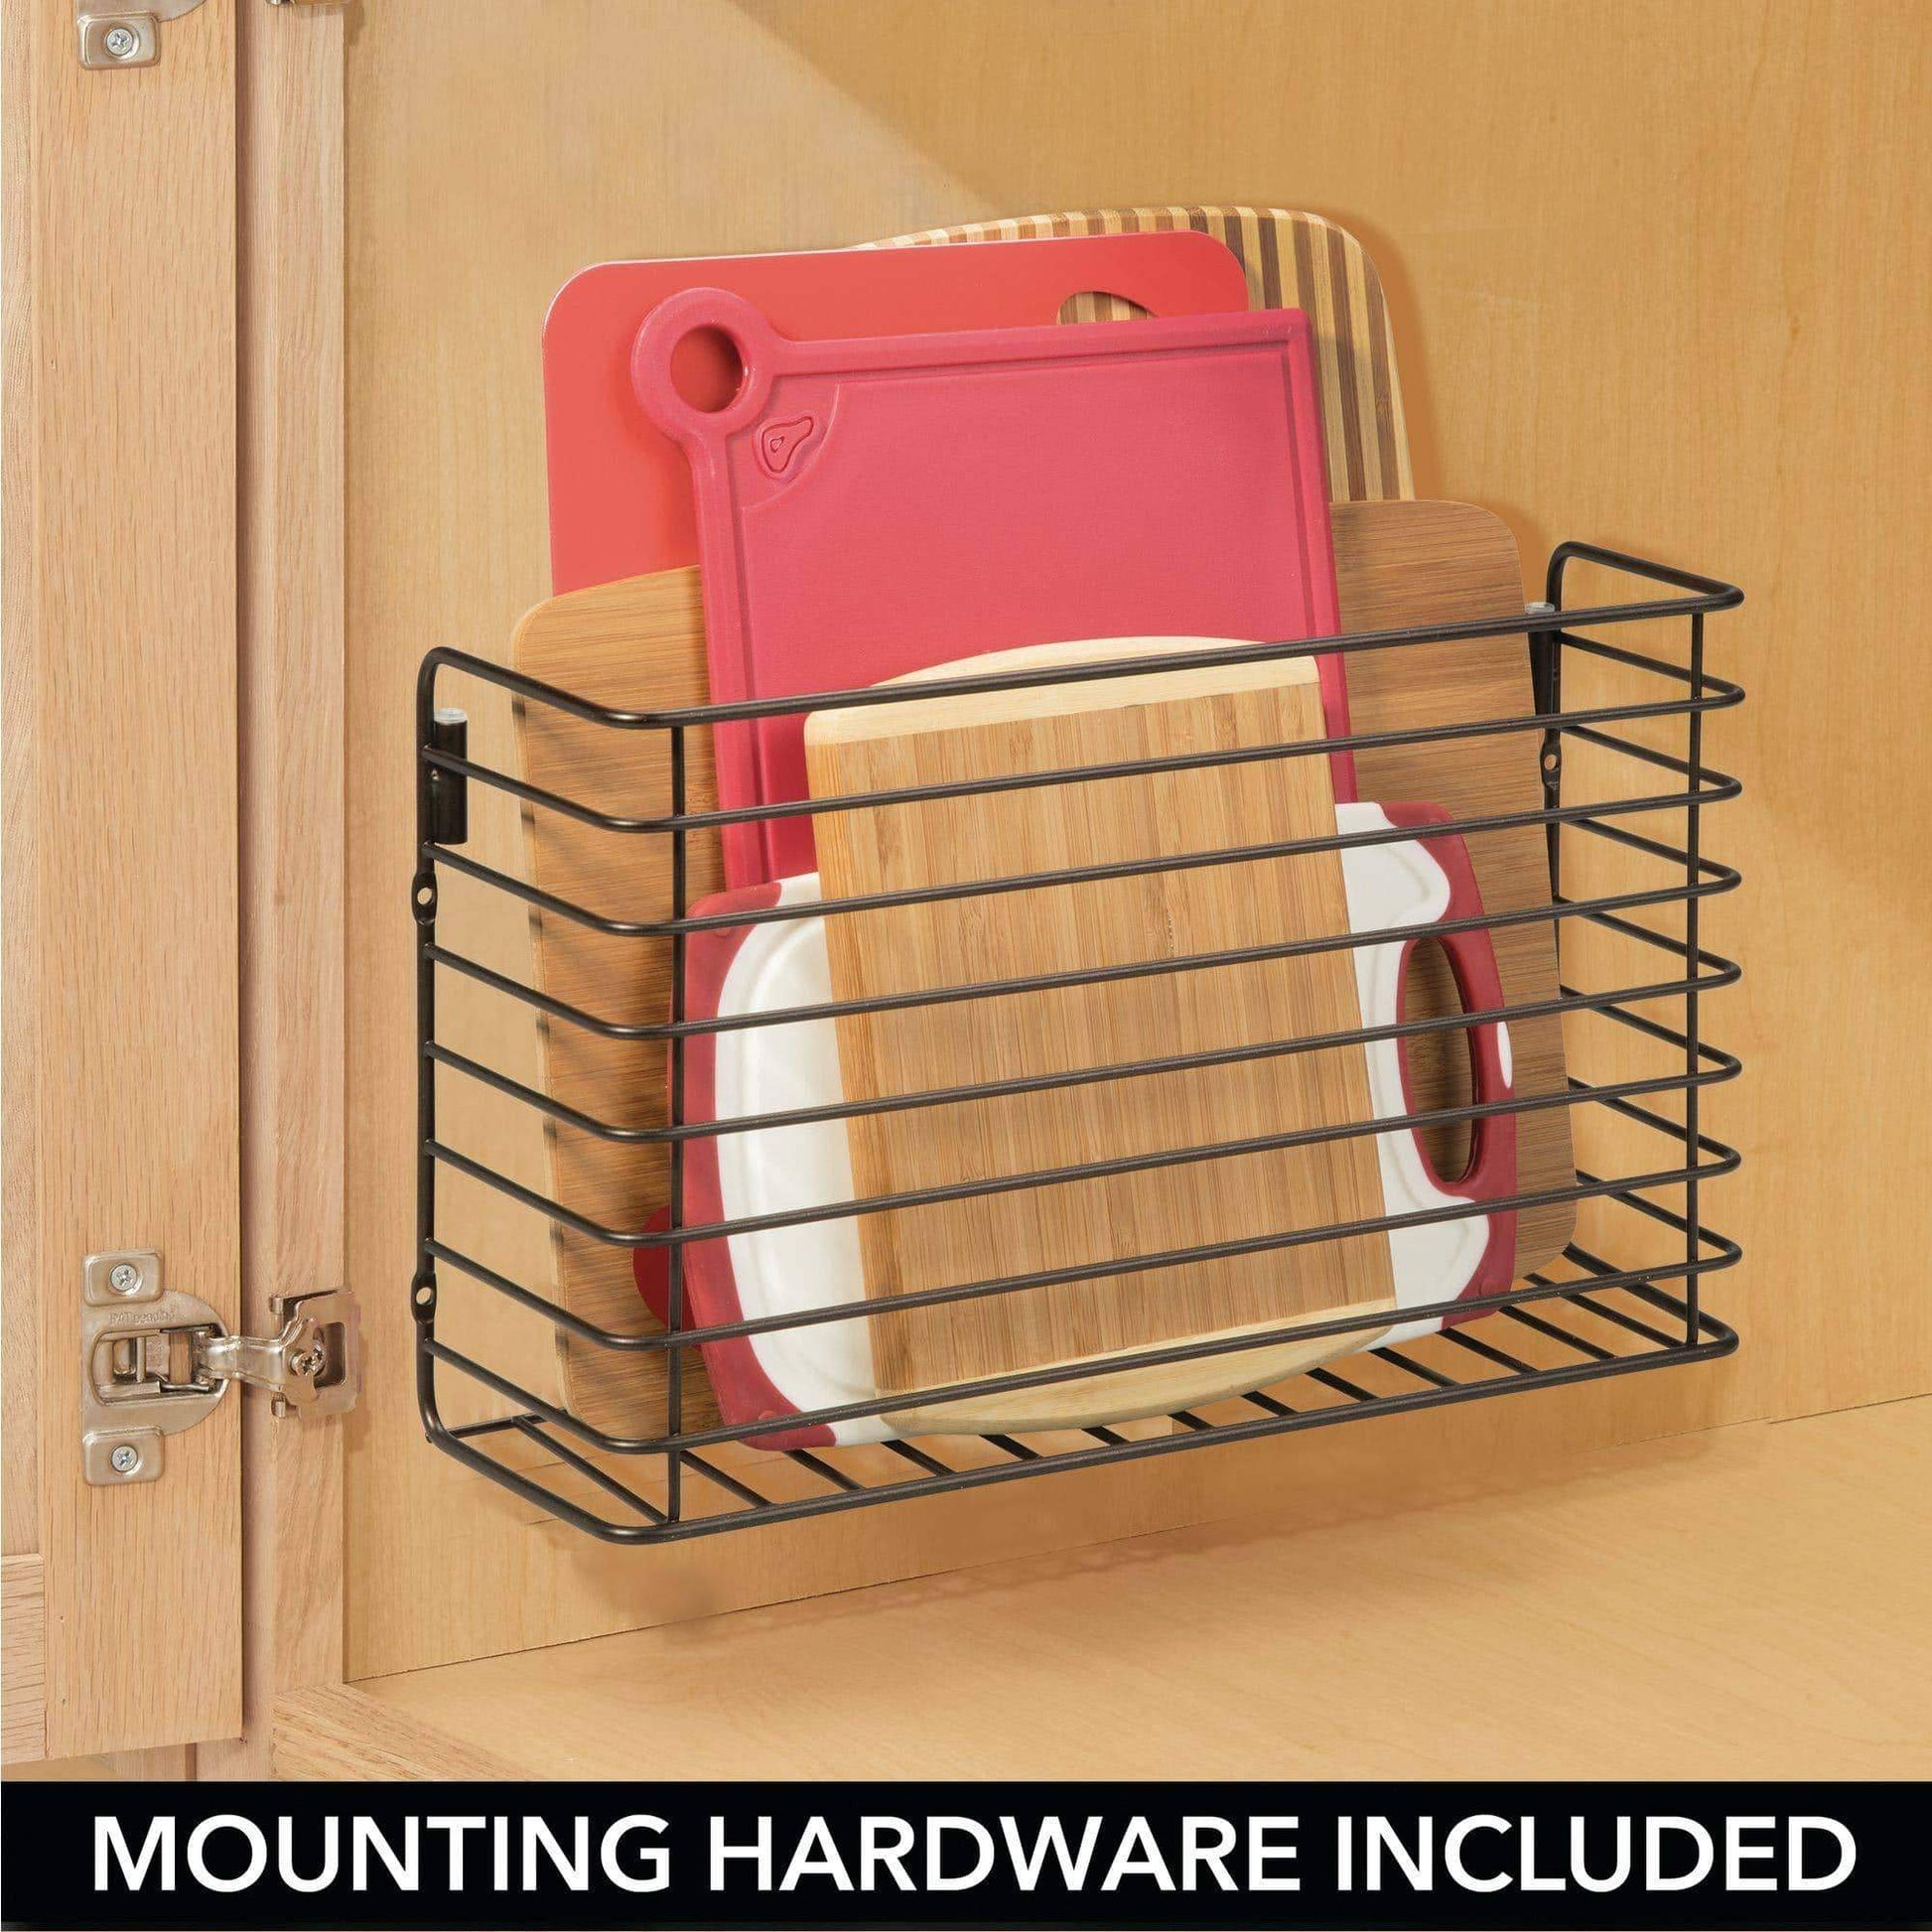 Discover metal over cabinet kitchen storage organizer holder or basket hang over cabinet doors in kitchen pantry holds bakeware cookbook cleaning supplies 2 pack steel wire in bronze